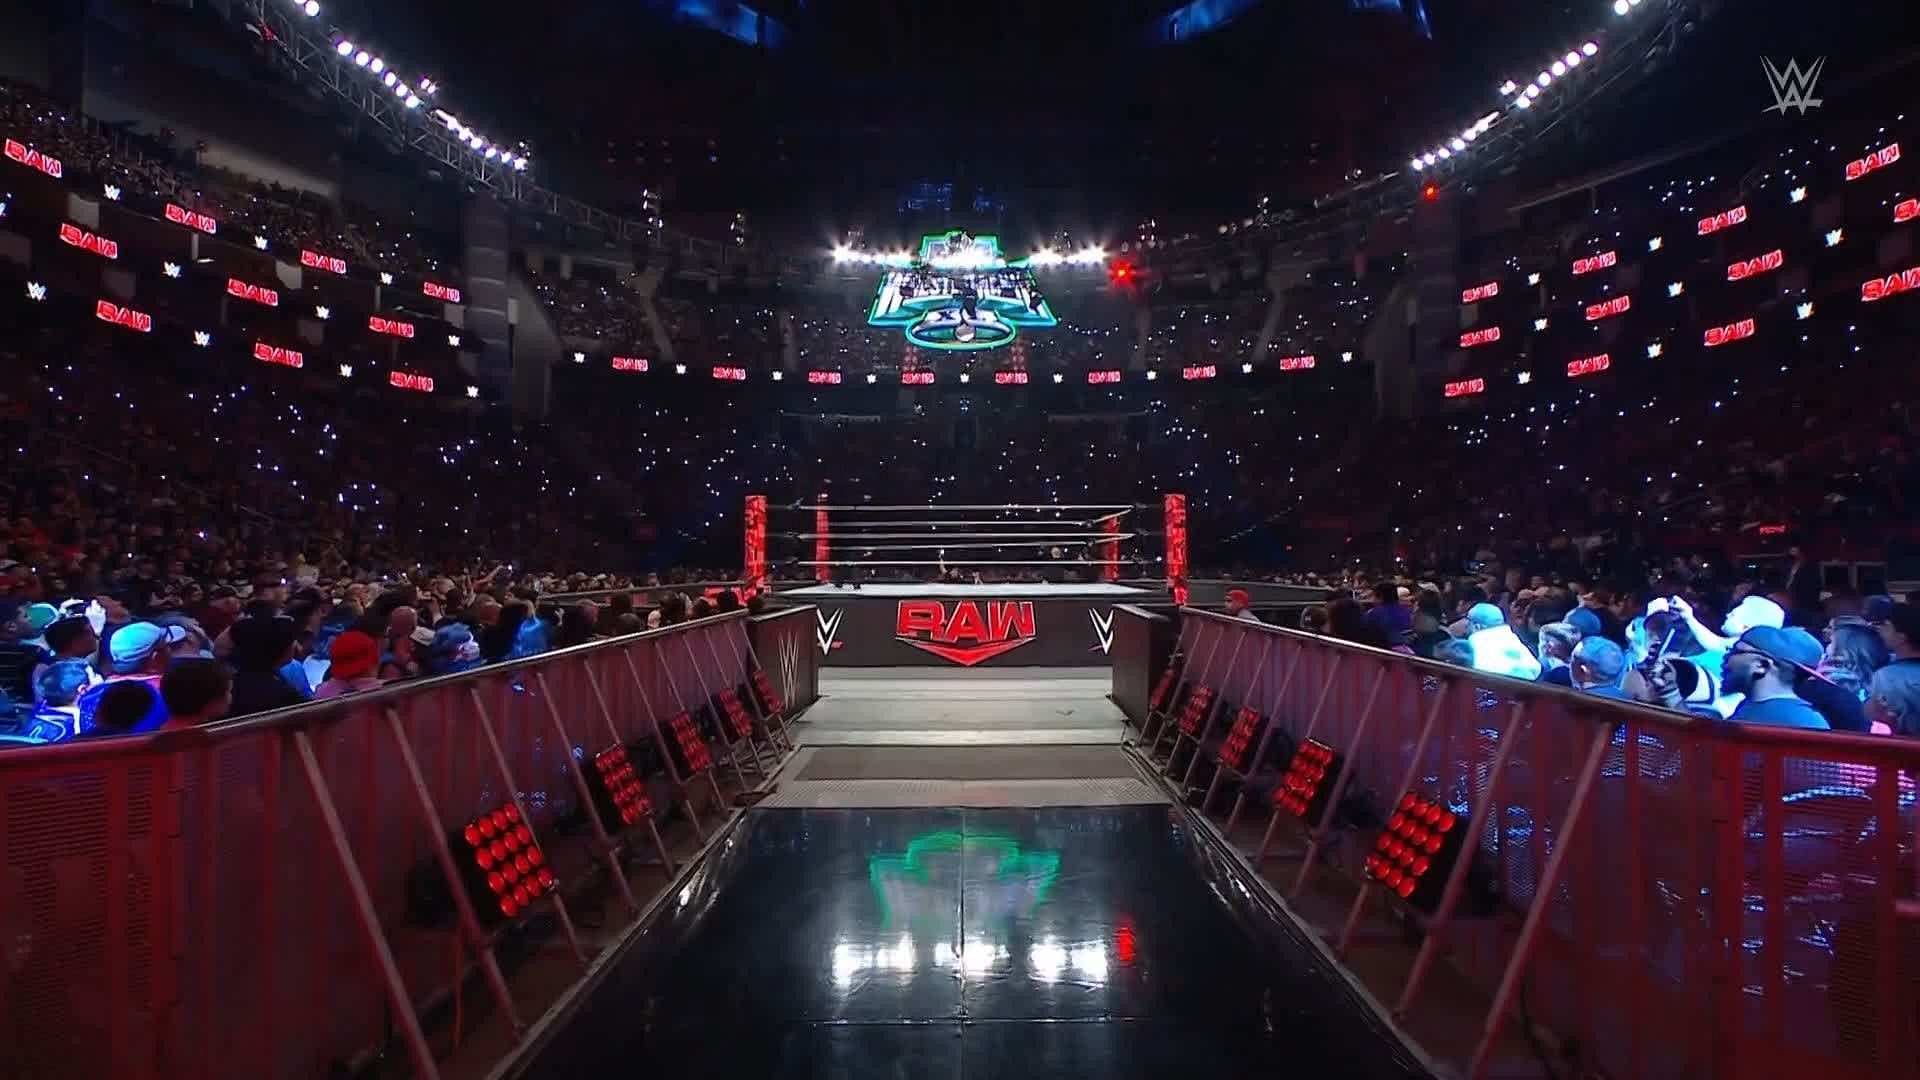 WWE Universe packs the arena for a live RAW on The Road to WrestleMania XL